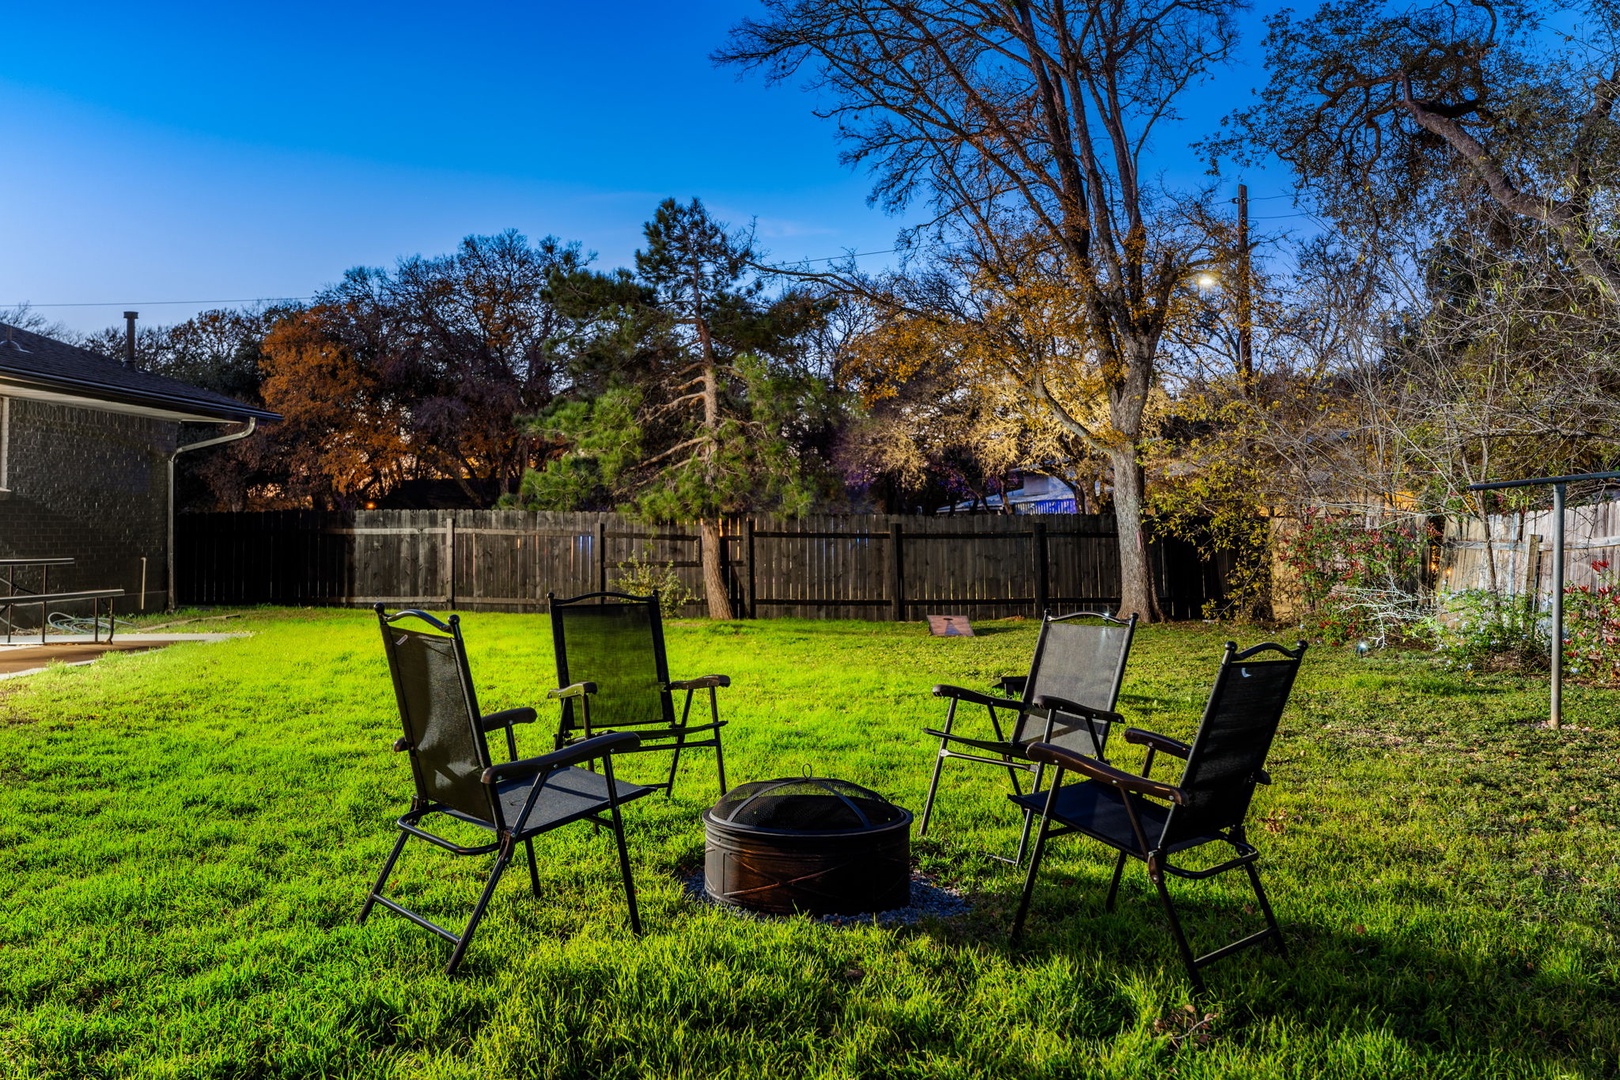 The large back yard offers ample space for relaxation & play